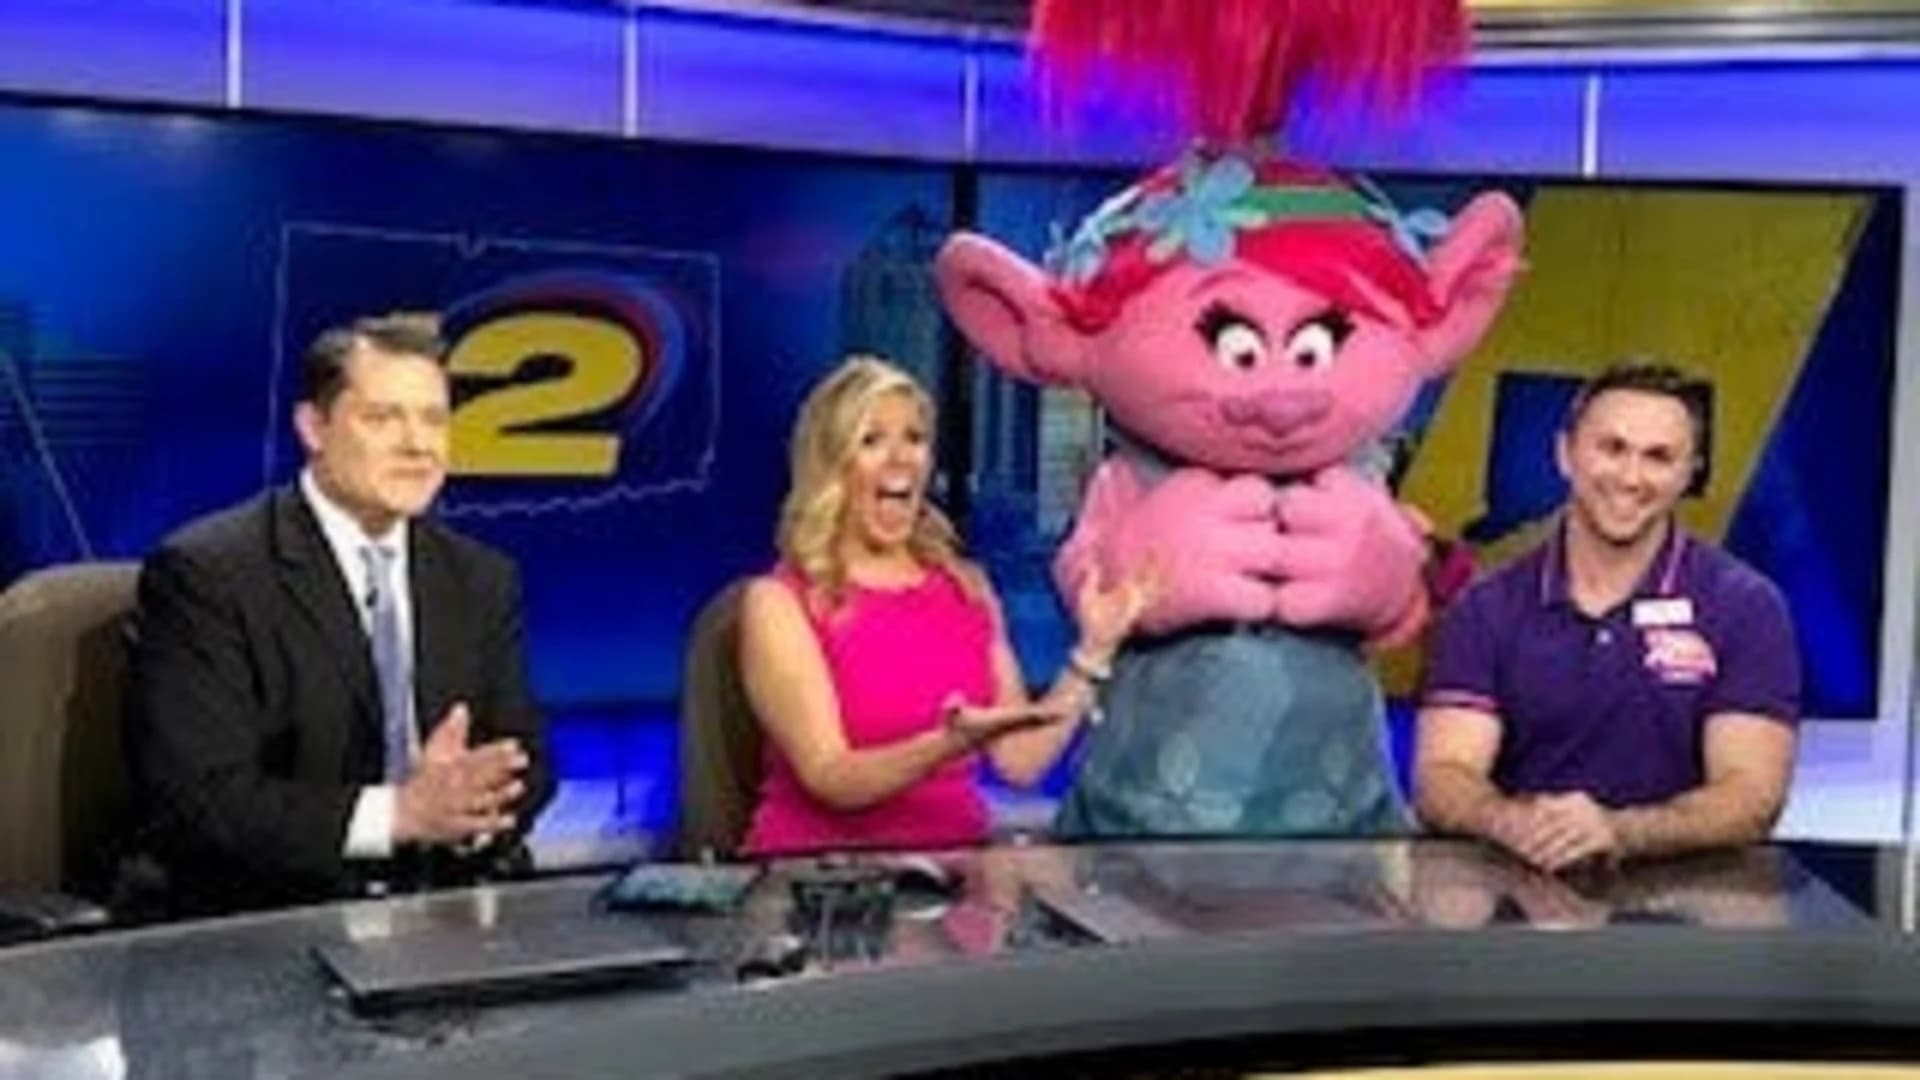 Queen Poppy visits News 12 Connecticut